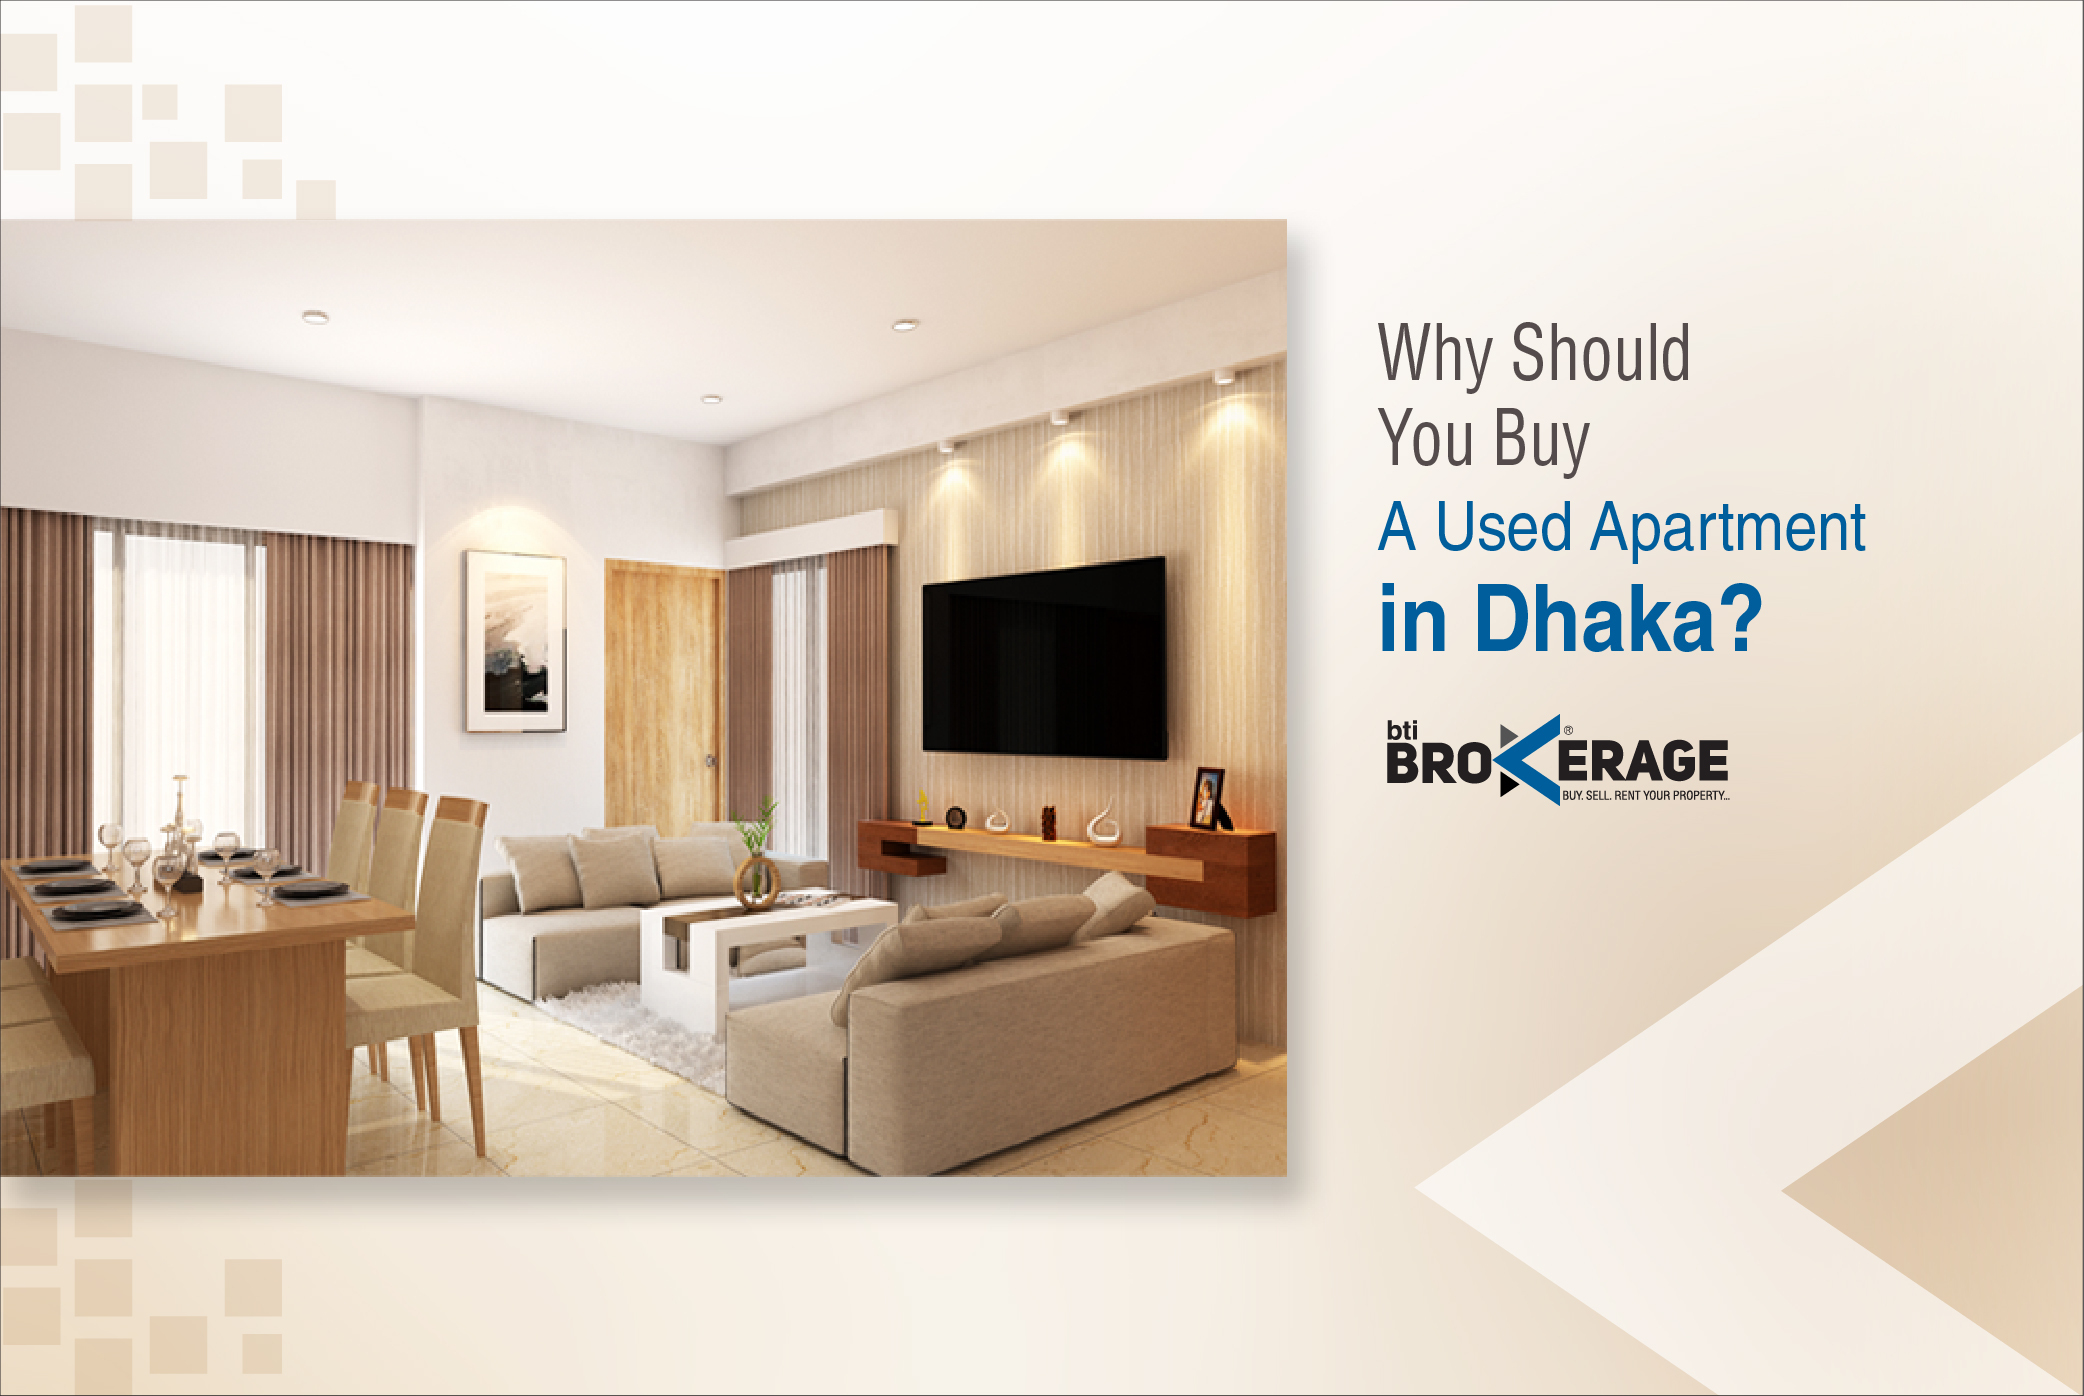 why-should-you-buy-a-used-apartment-in-dhaka-866580